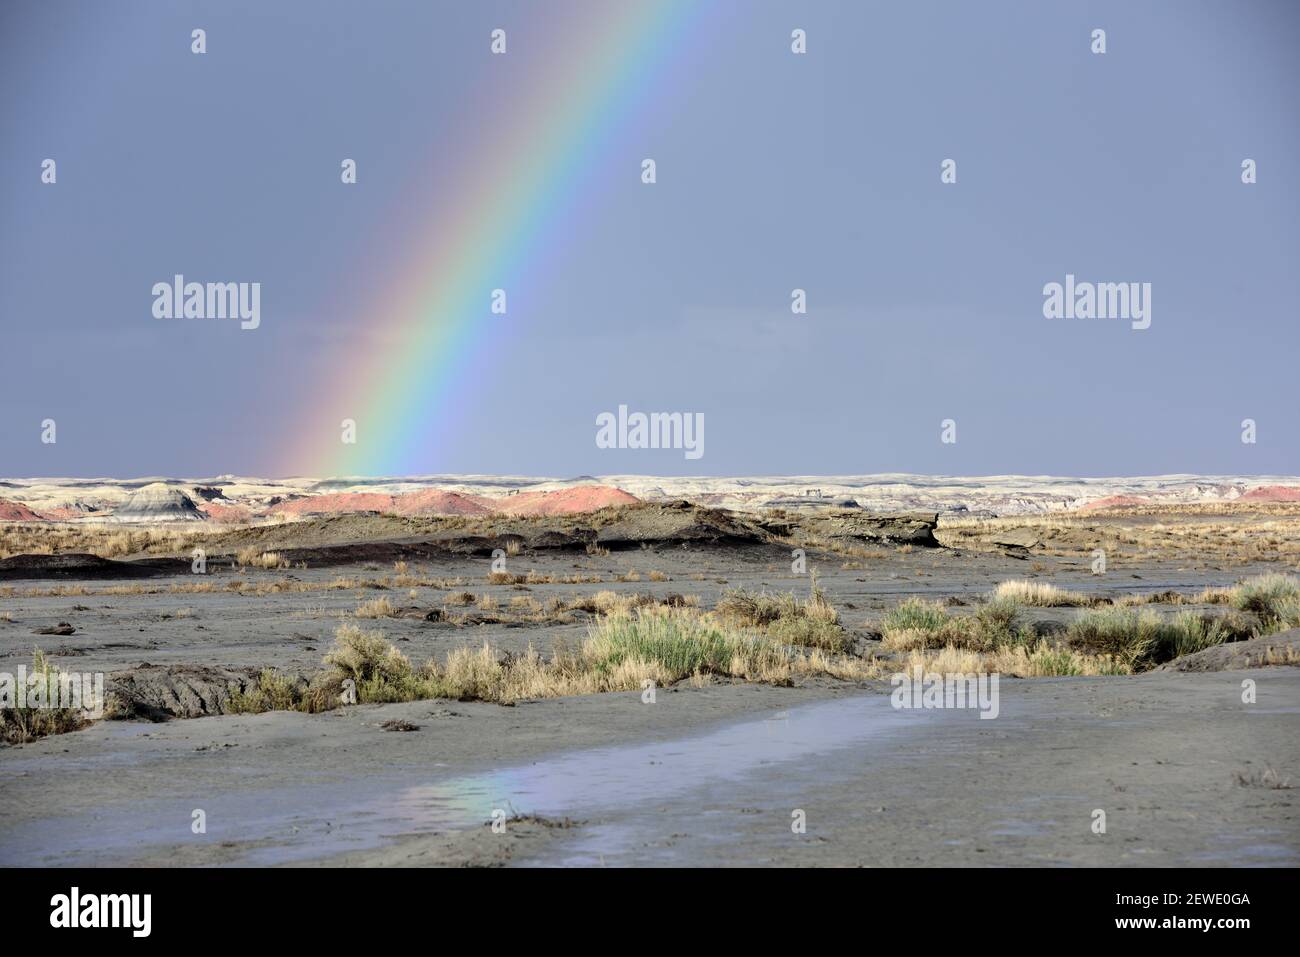 A rainbow pictured over the Bisti/De-Na-Zin Wilderness in New Mexico on April 8, 2016. The area was once a delta that lay to the west of the Western Interior Seaway 70 million years ago, and the badlands  were formed by the erosion of the sandy Ojo Alamo Formation. (Photo by Alex Milan Tracy) *** Please Use Credit from Credit Field *** Stock Photo